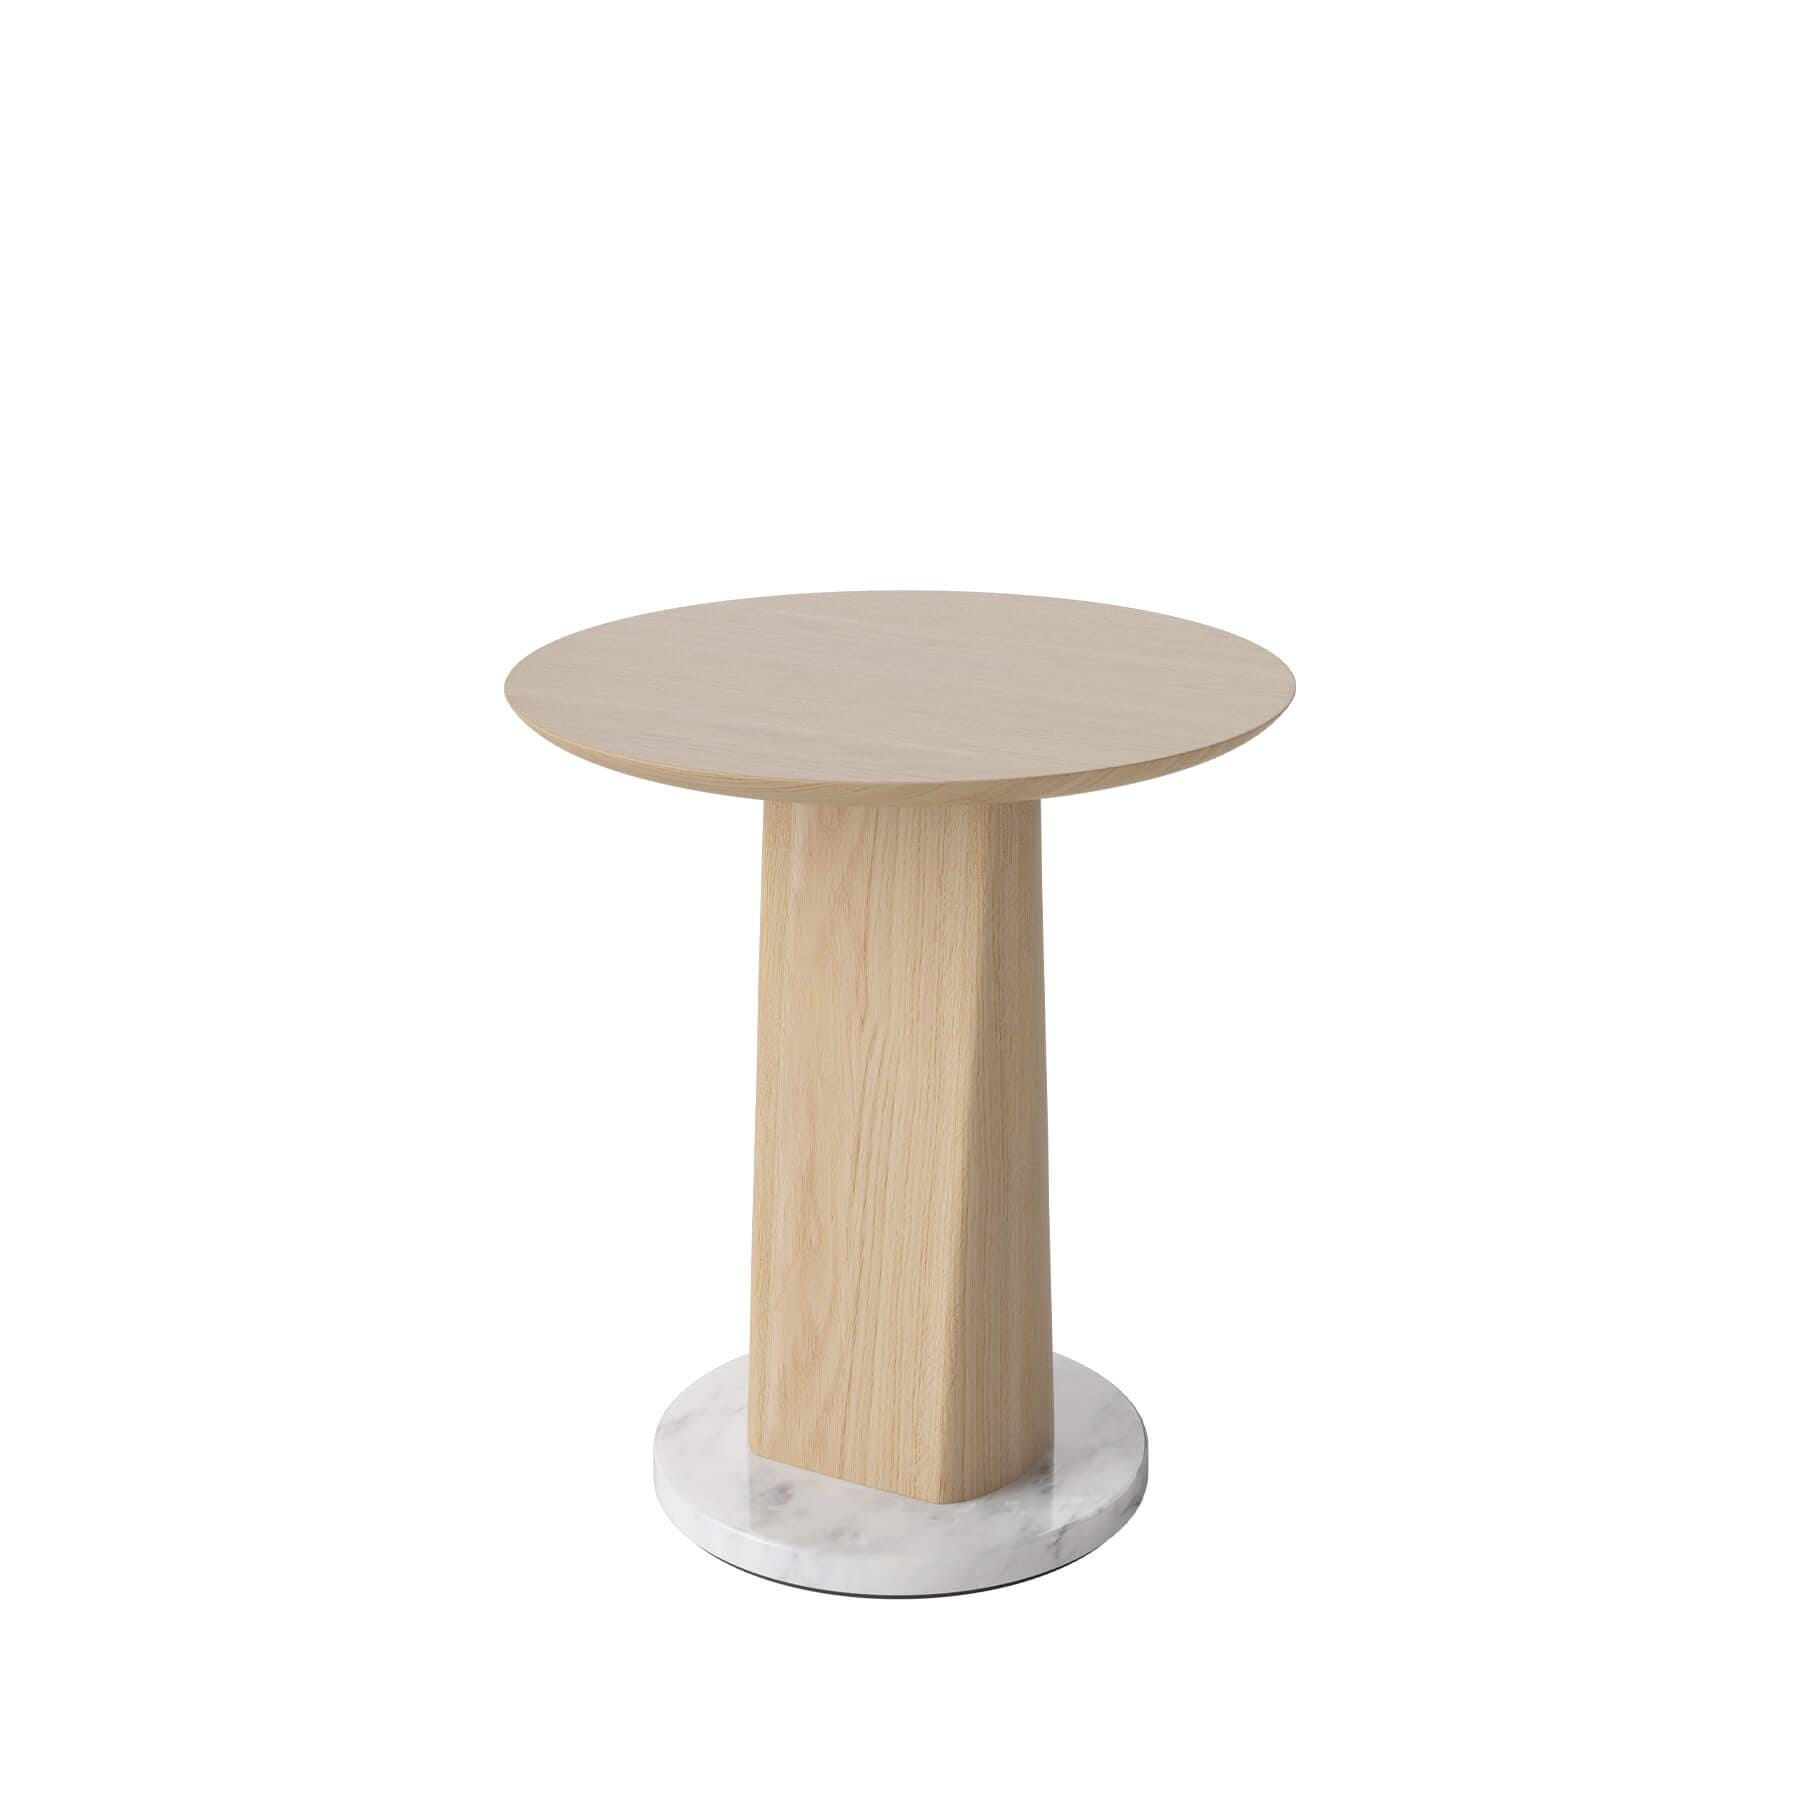 Bolia Root Side Table Small Low White Oiled Oak Light Wood Designer Furniture From Holloways Of Ludlow